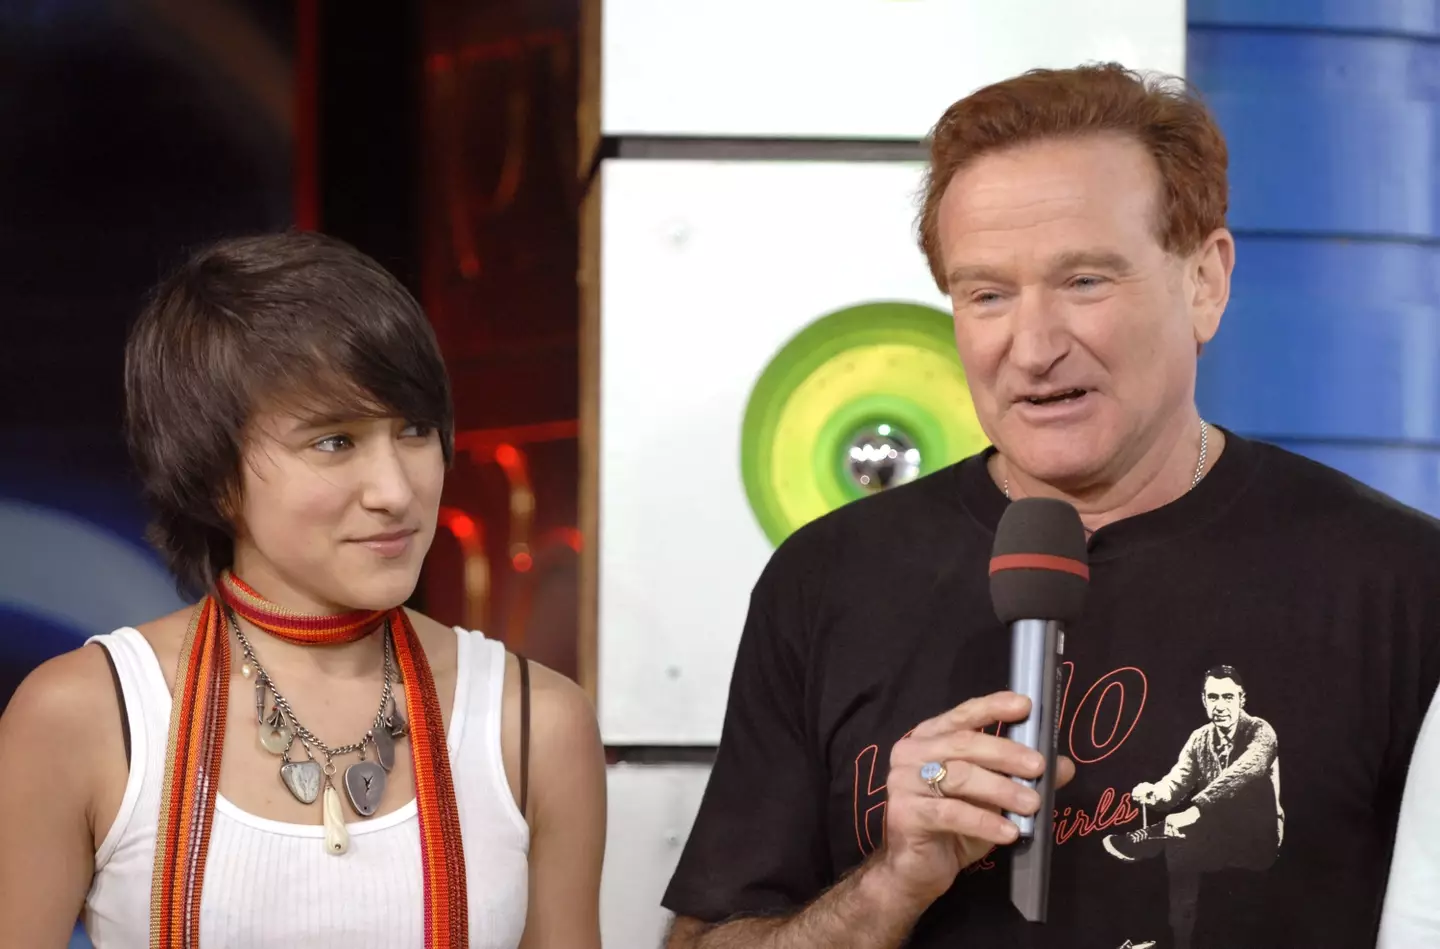 Zelda has seen AI used to recreate her dad, Robin Williams', voice.